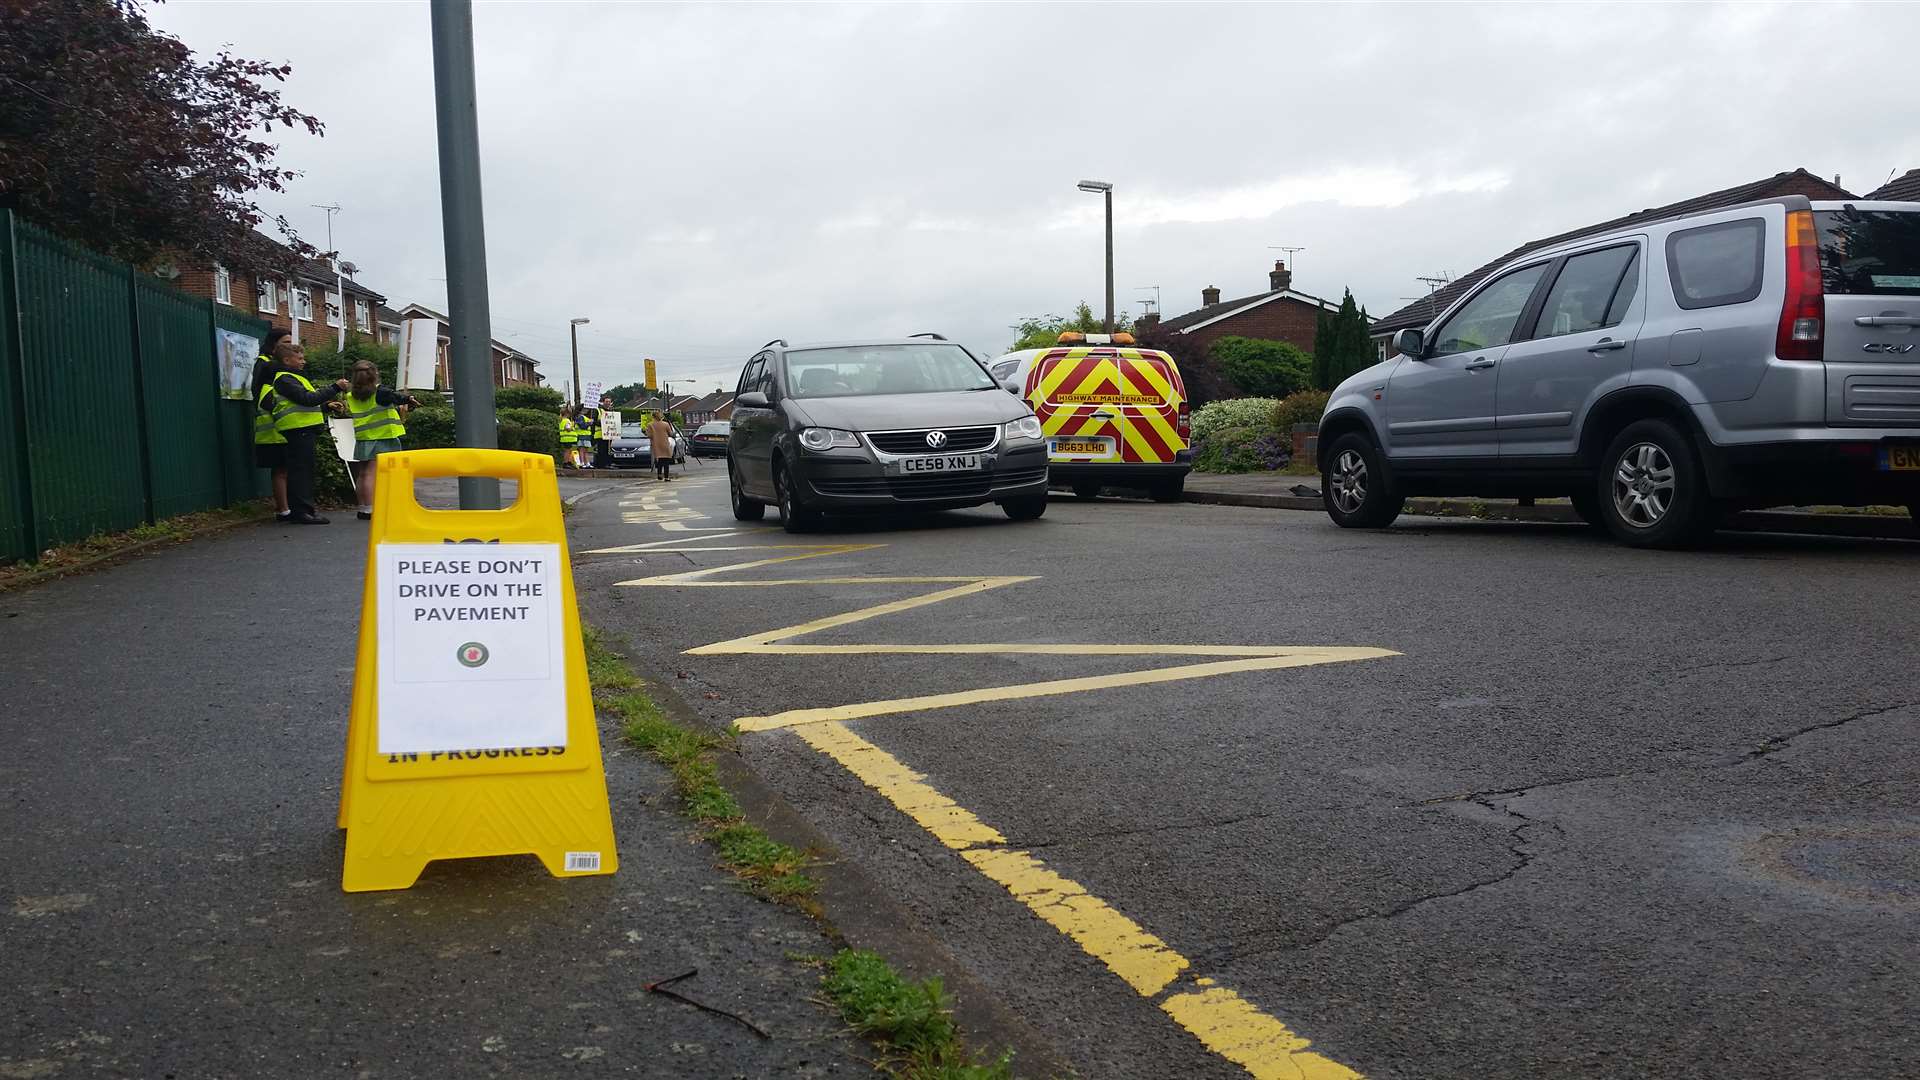 The pupils are campaigning to stop parents parking outside the school gates